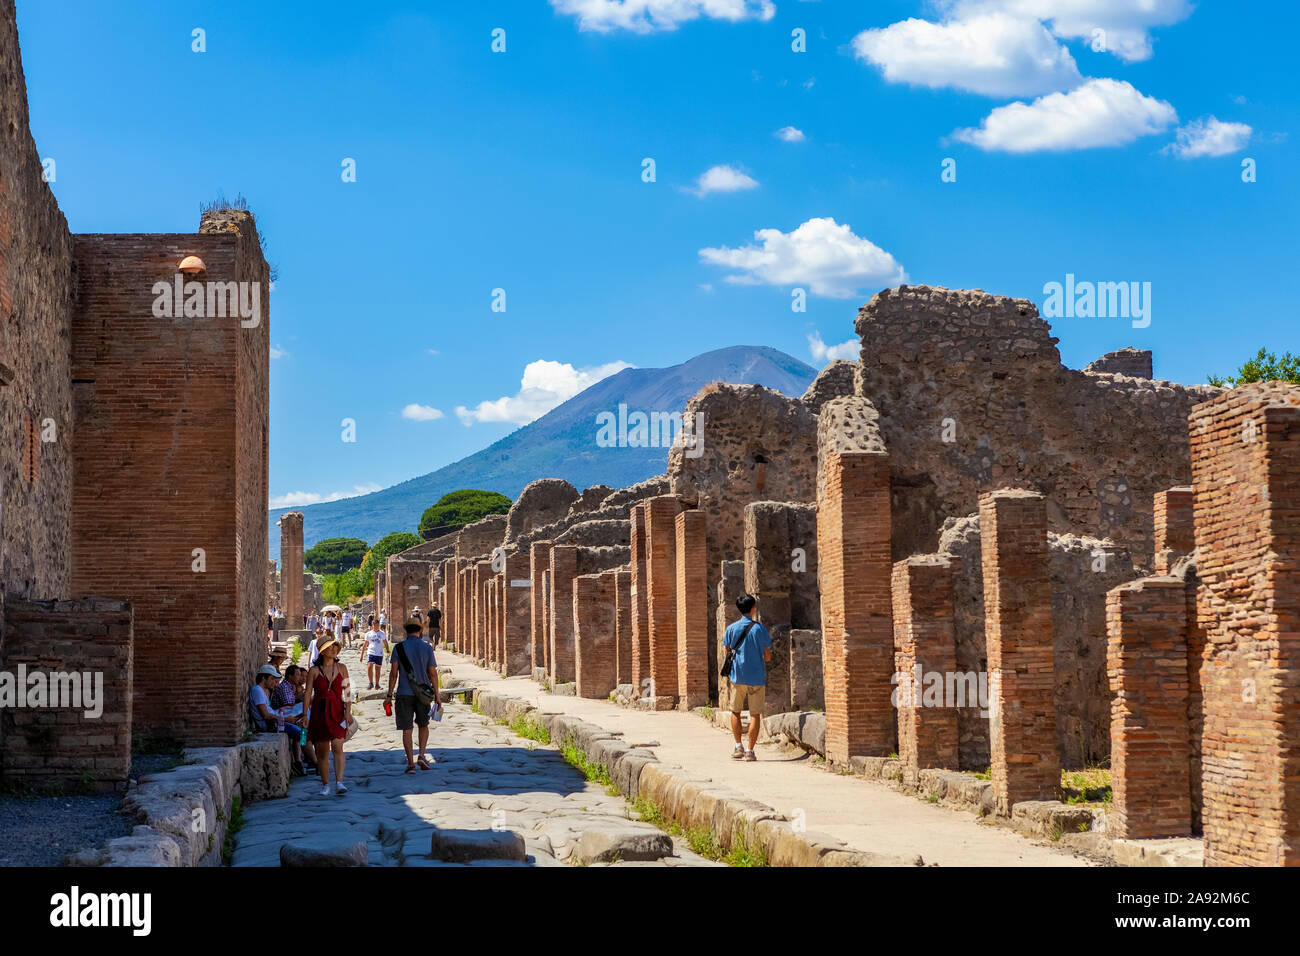 Tourists walk through the excavated ruins down a street in Pompeii with Mount Vesuvius in the background; Pompeii, Province of Naples, Campania, Italy Stock Photo